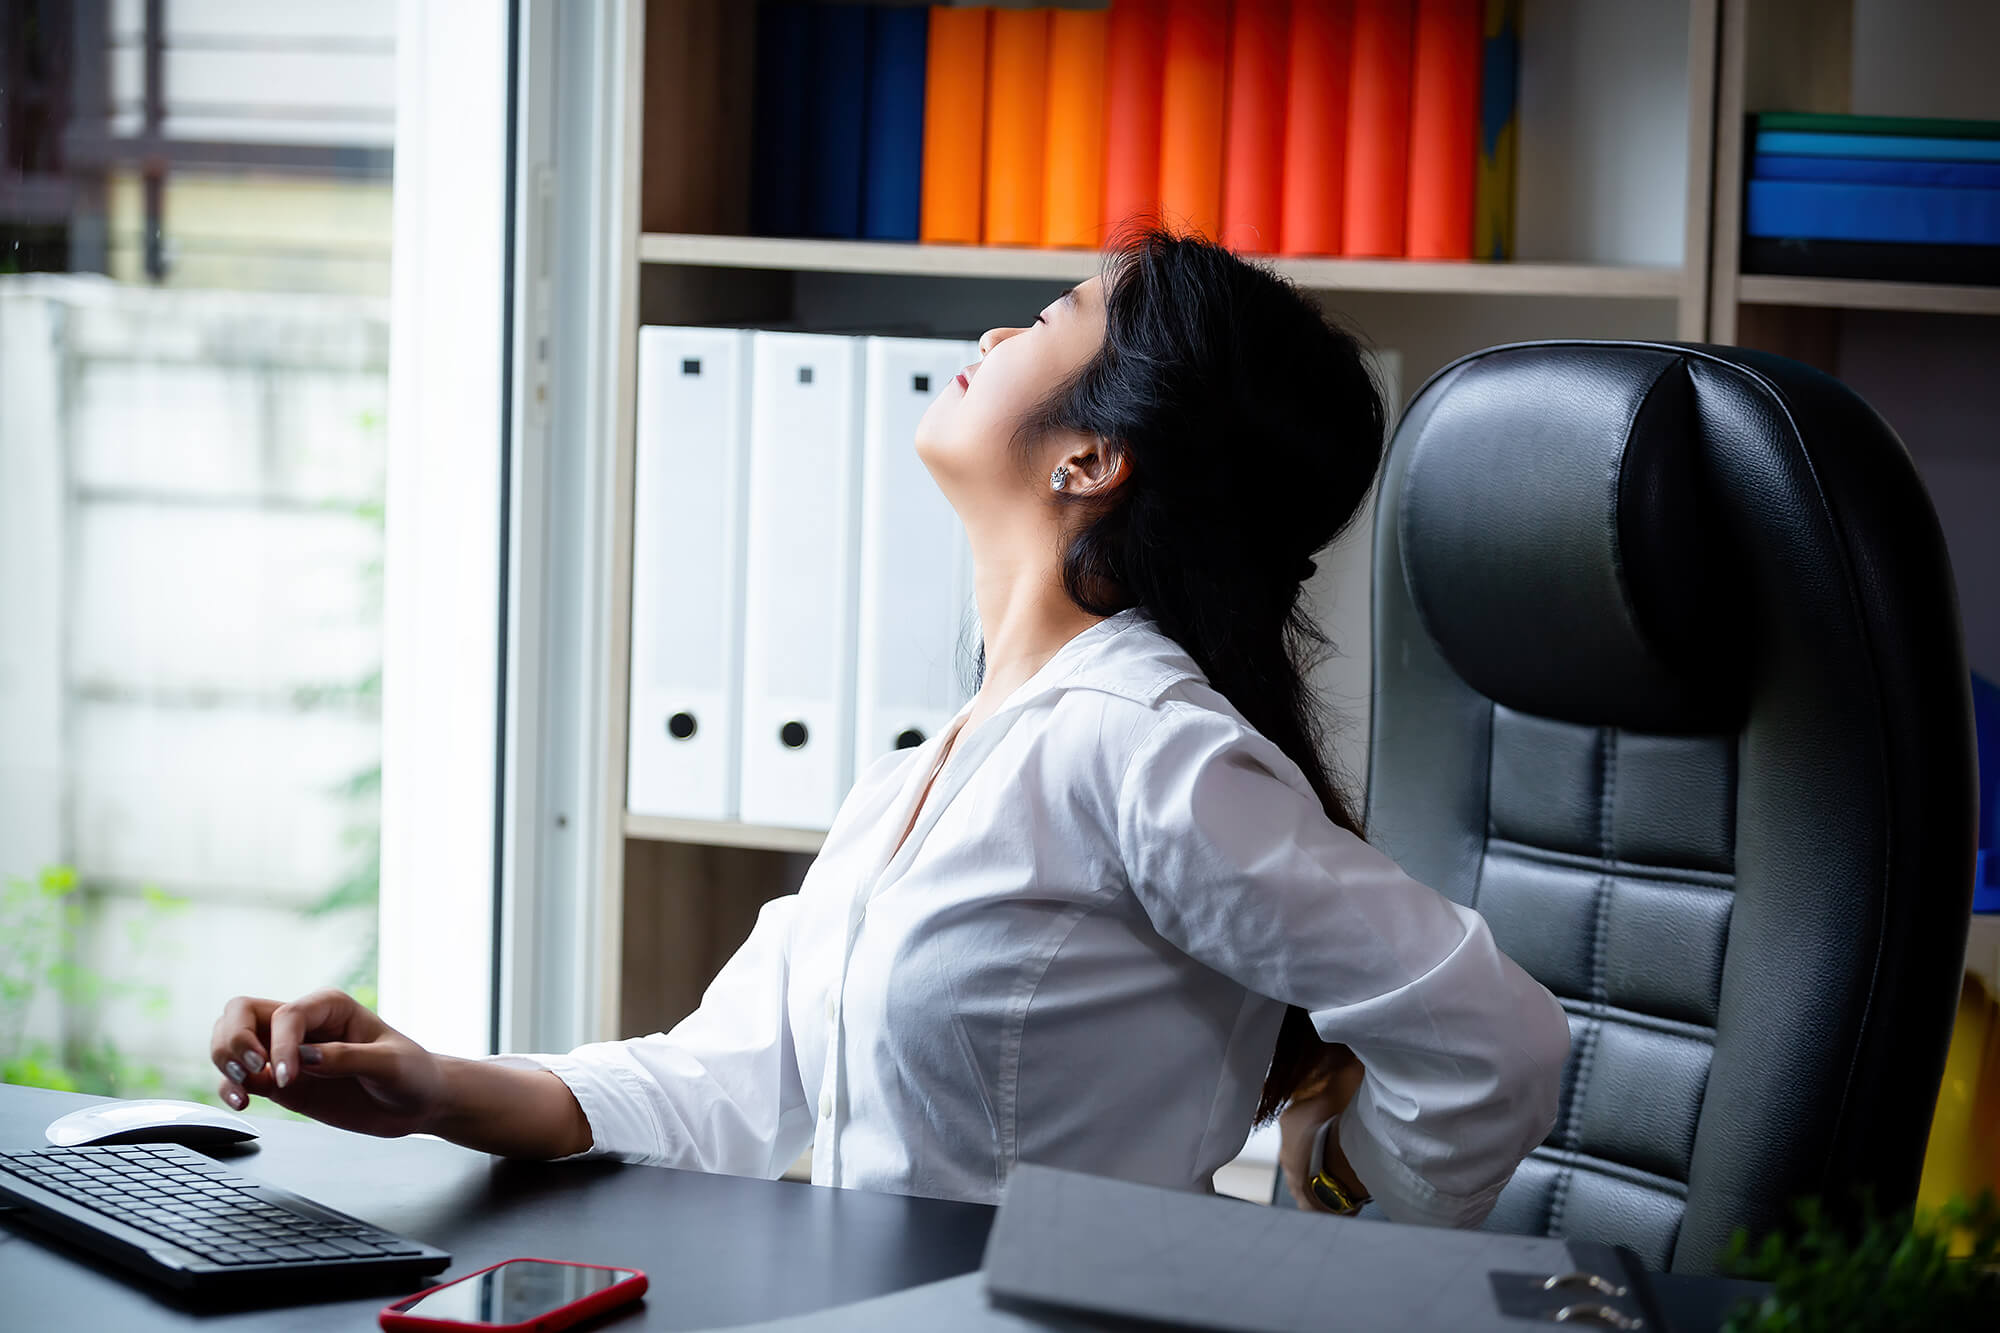 The 5 Most Common Work-Related Ergonomic Injuries and How to Treat Them